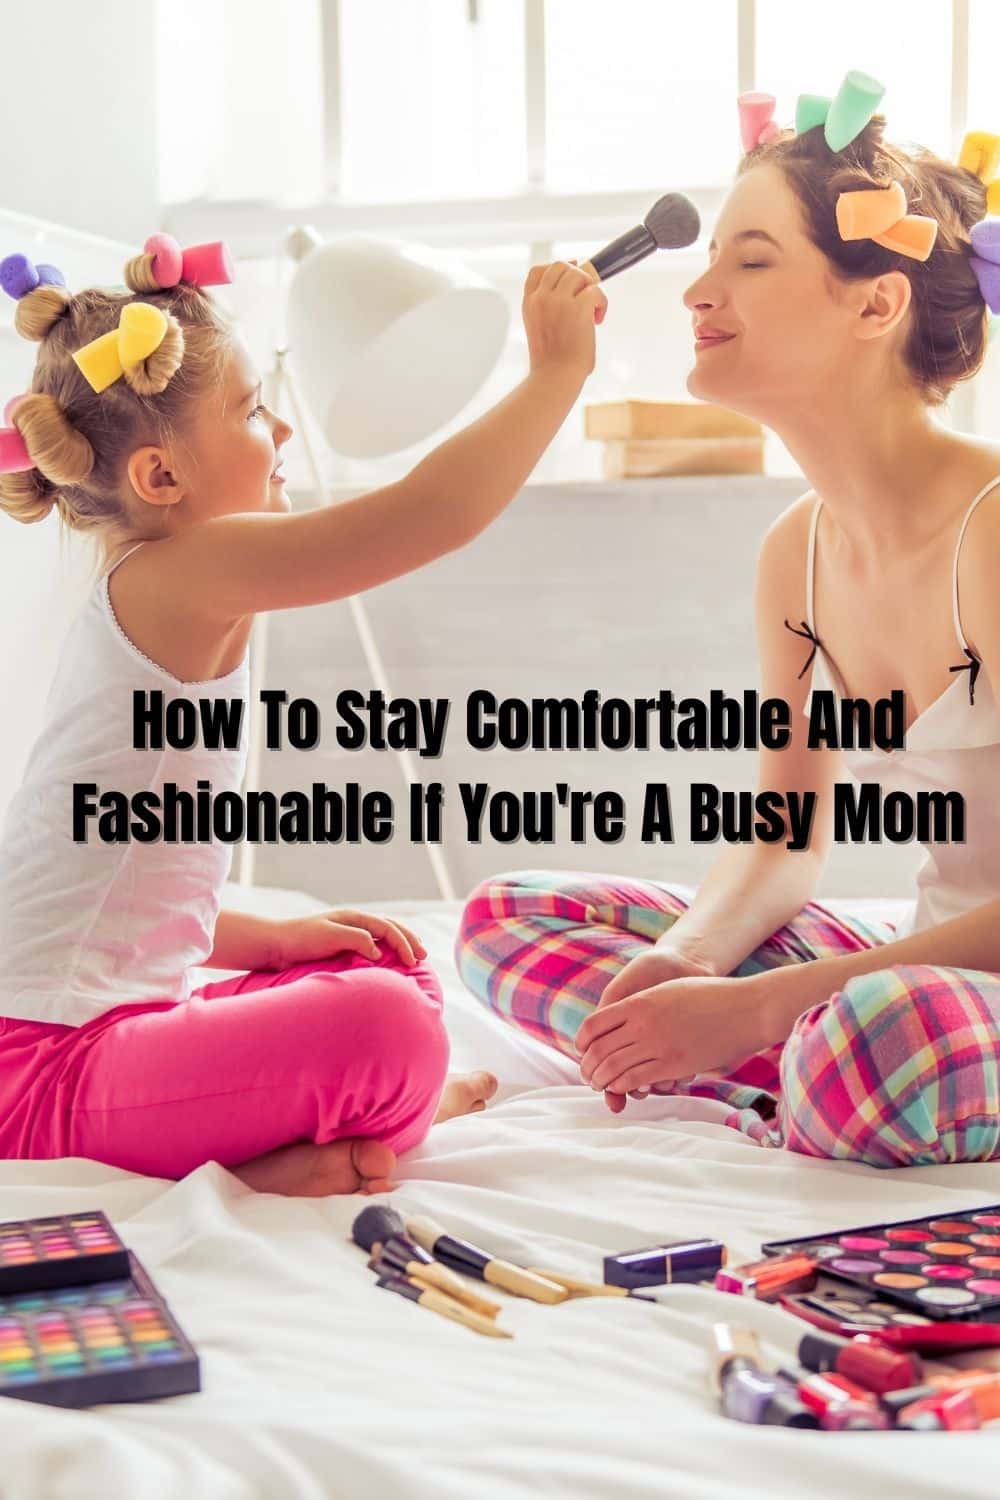 How To Stay Comfortable And Fashionable If You're A Busy Mom